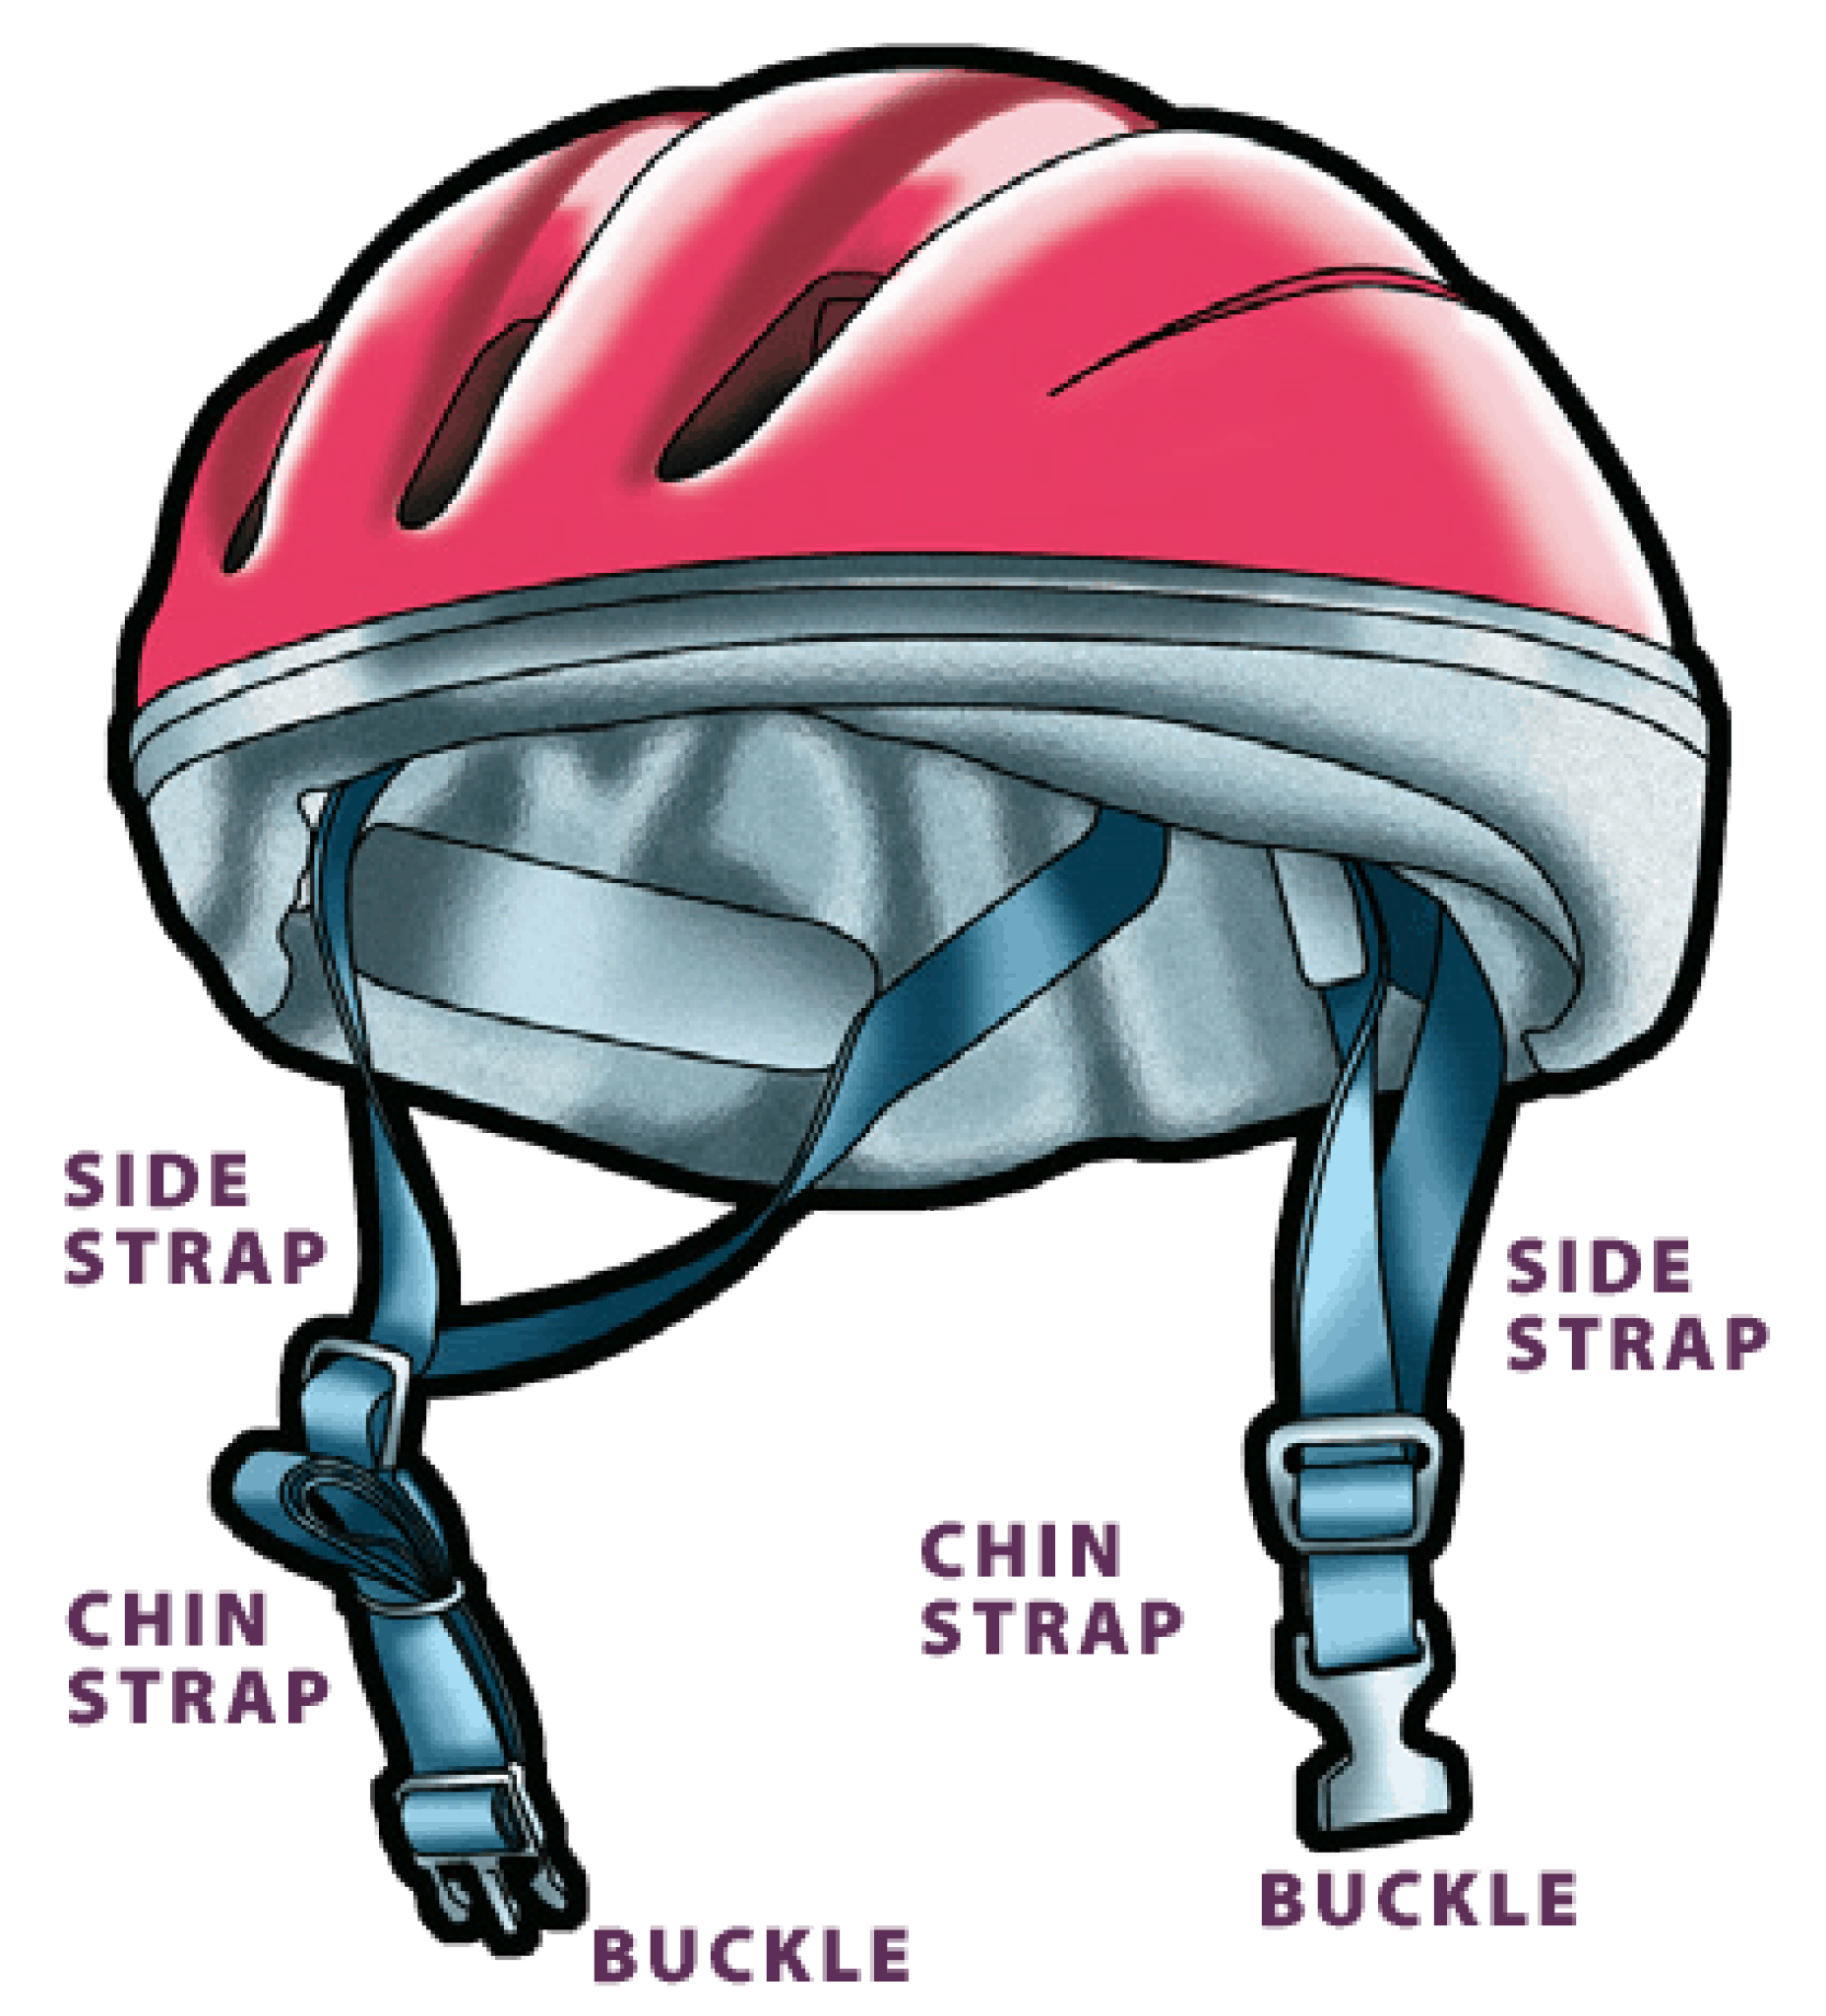 What are Bike Helmets Made Of? (Structure & Safety System)